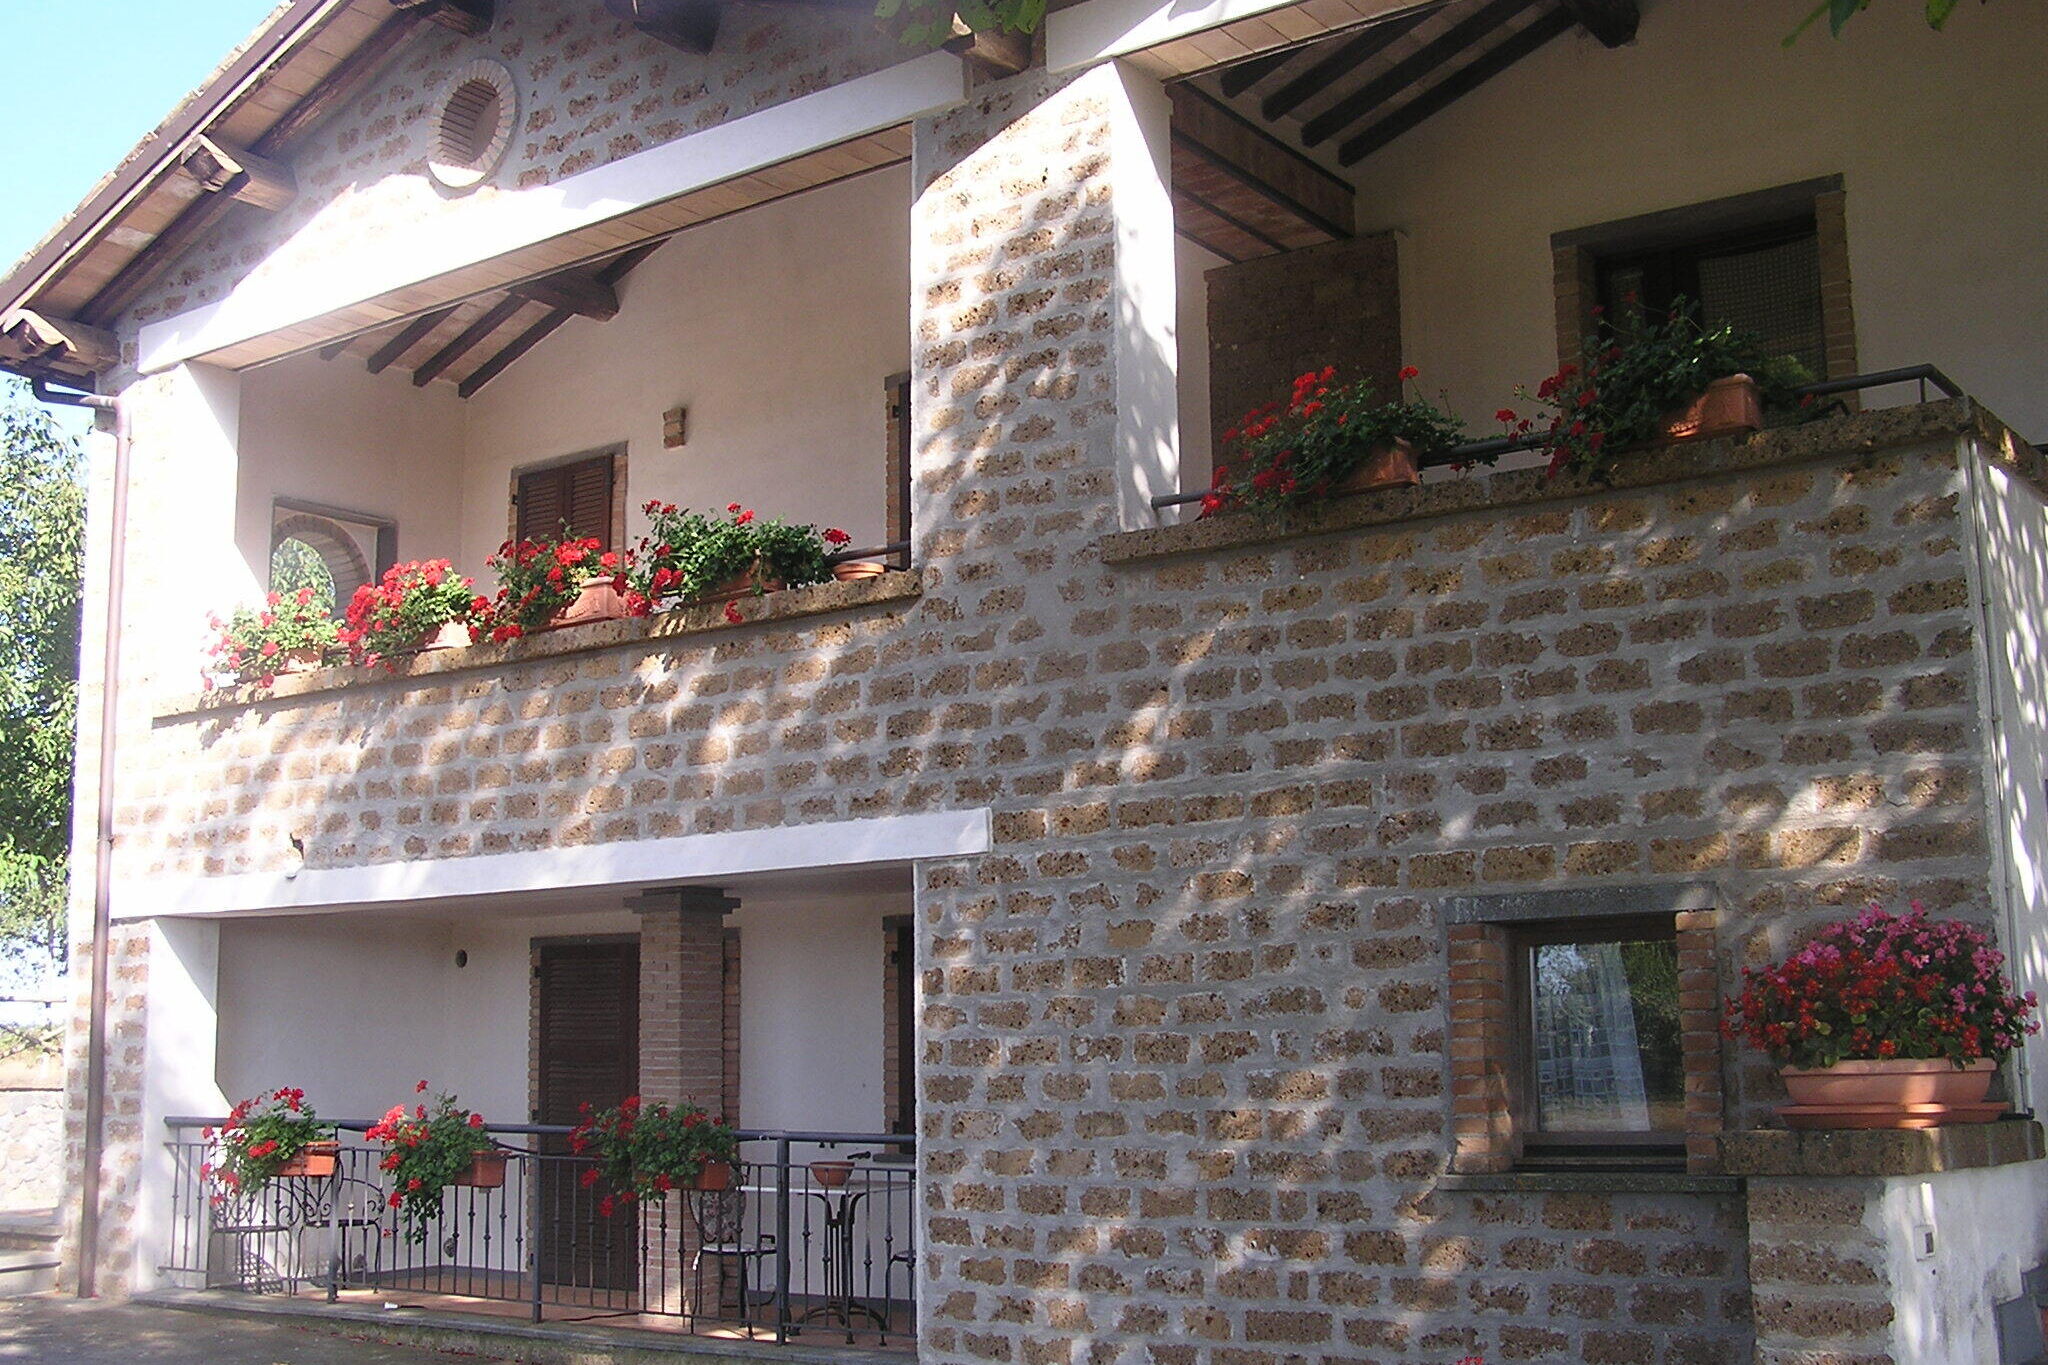 Elegant Farmhouse in Bagnoregio with swimming pool for 10-12 guests